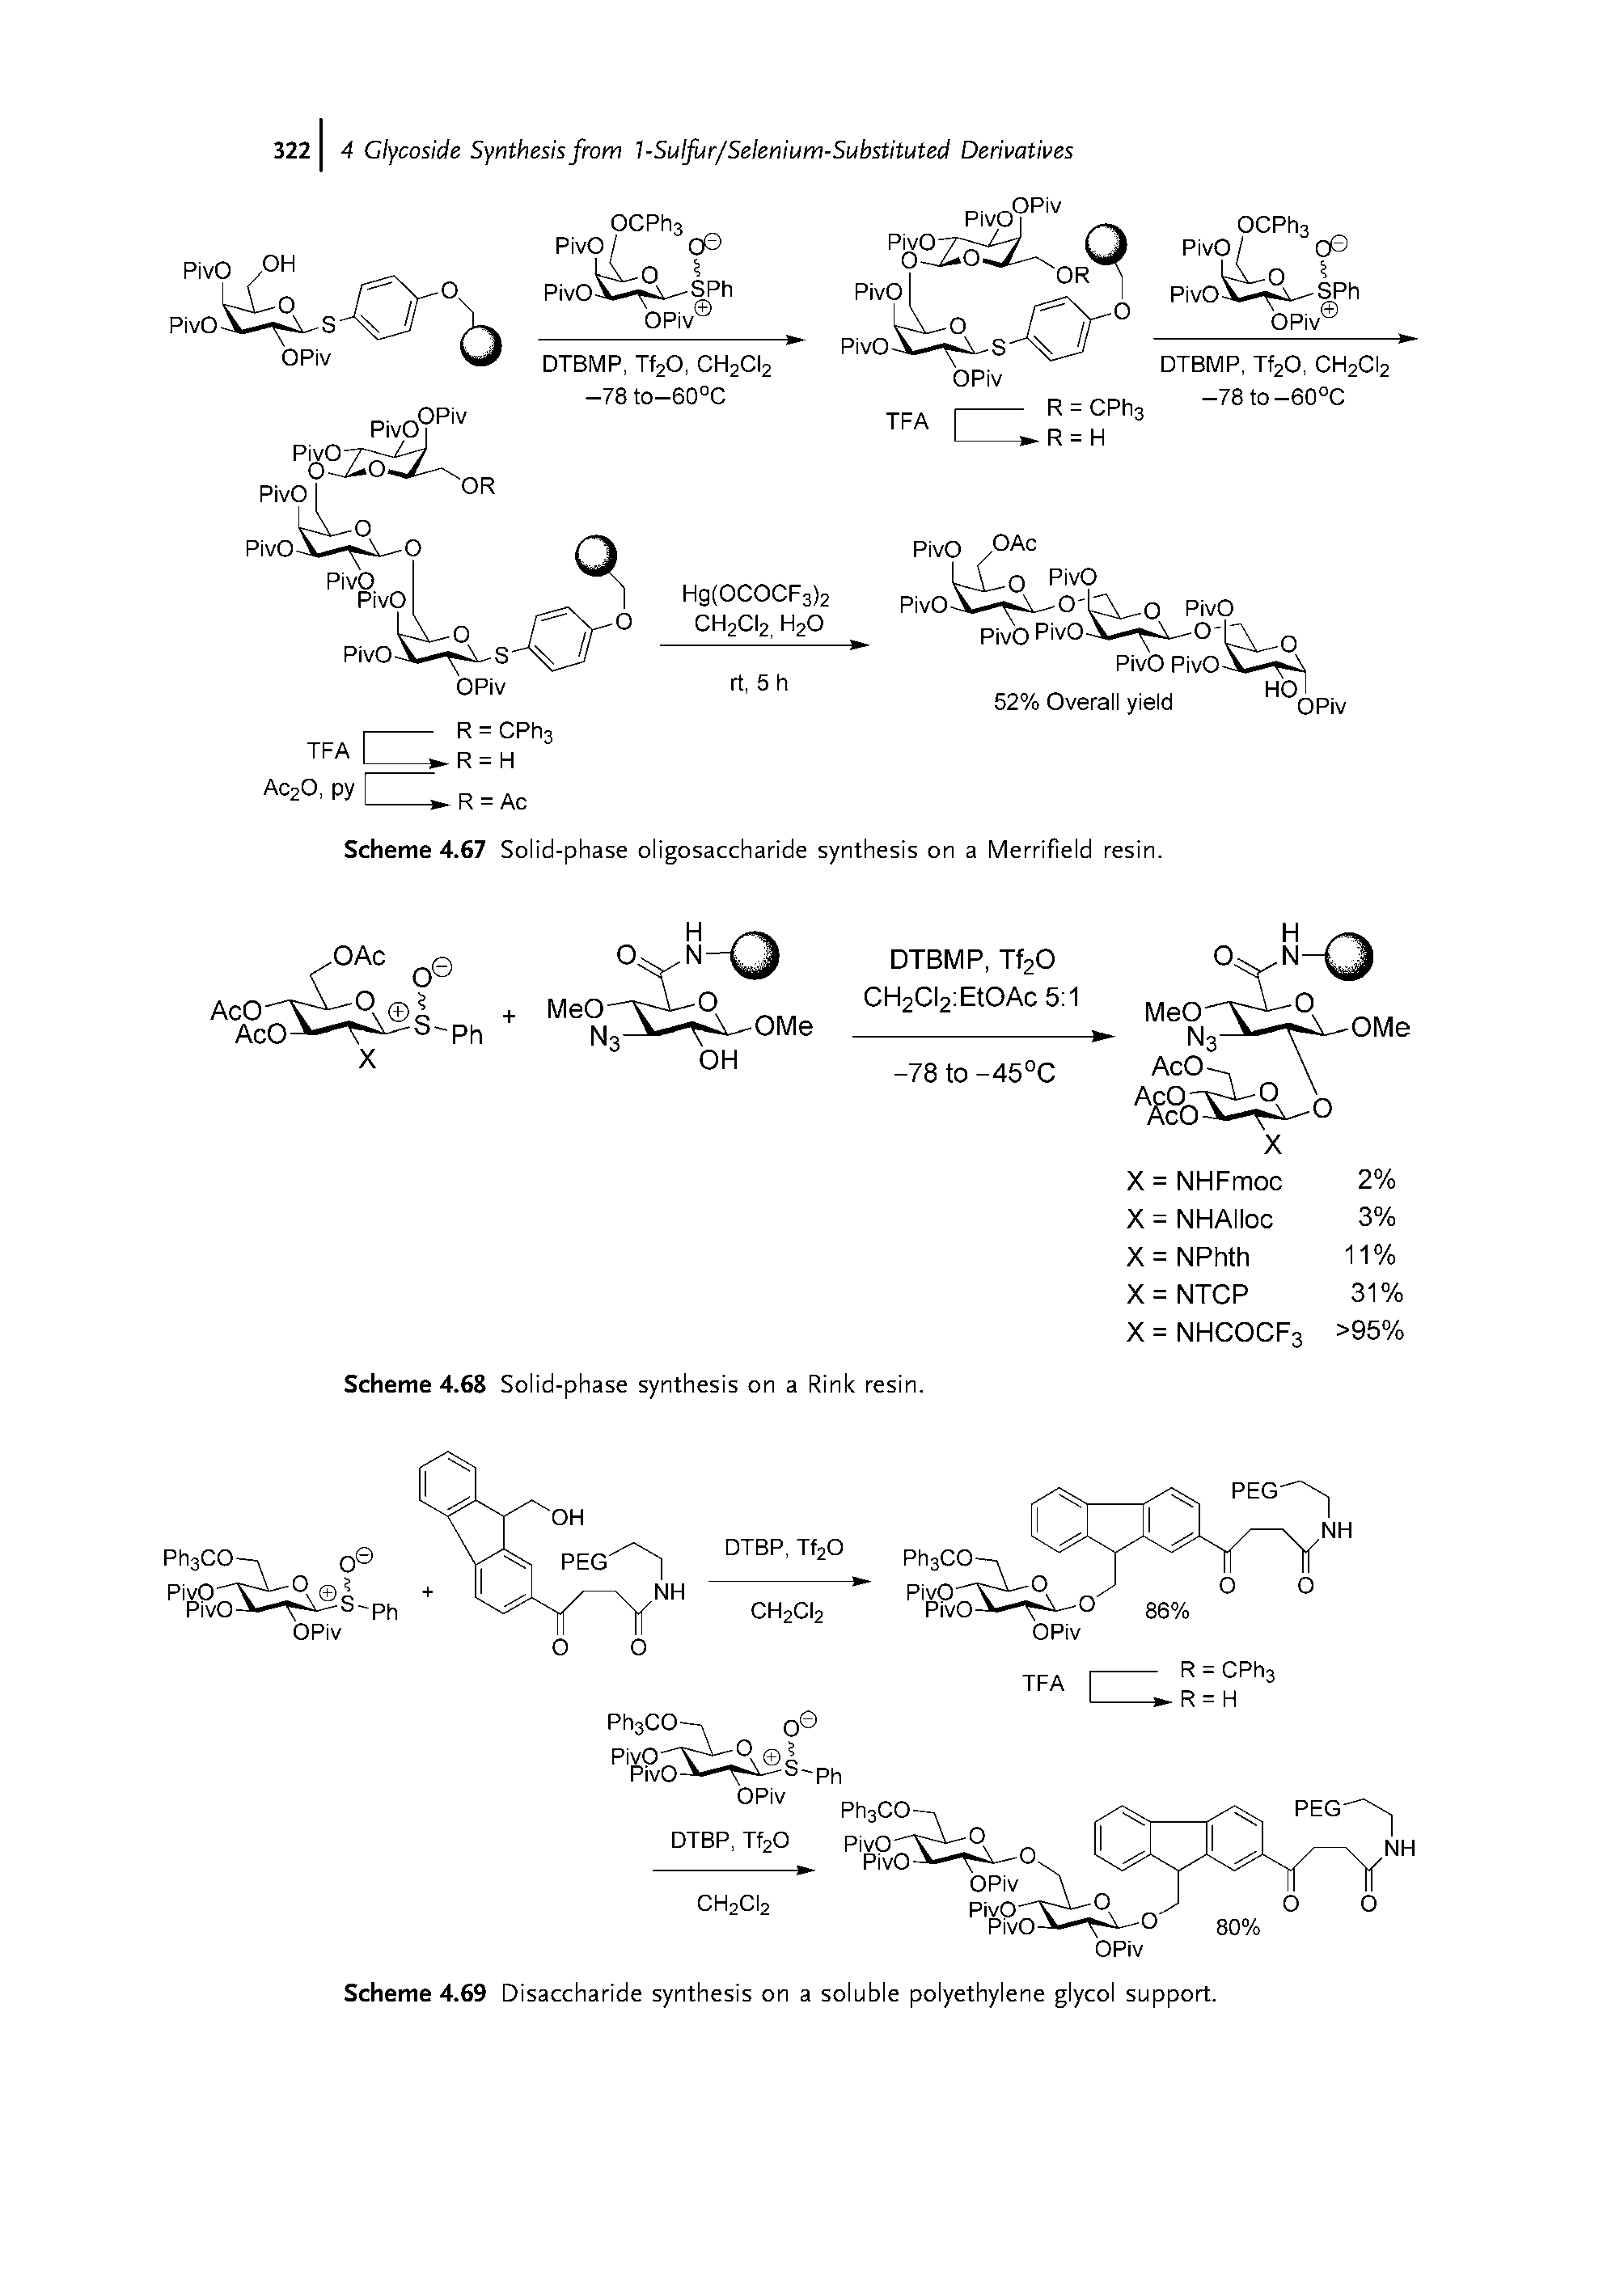 Scheme 4.69 Disaccharide synthesis on a soluble polyethylene glycol support.